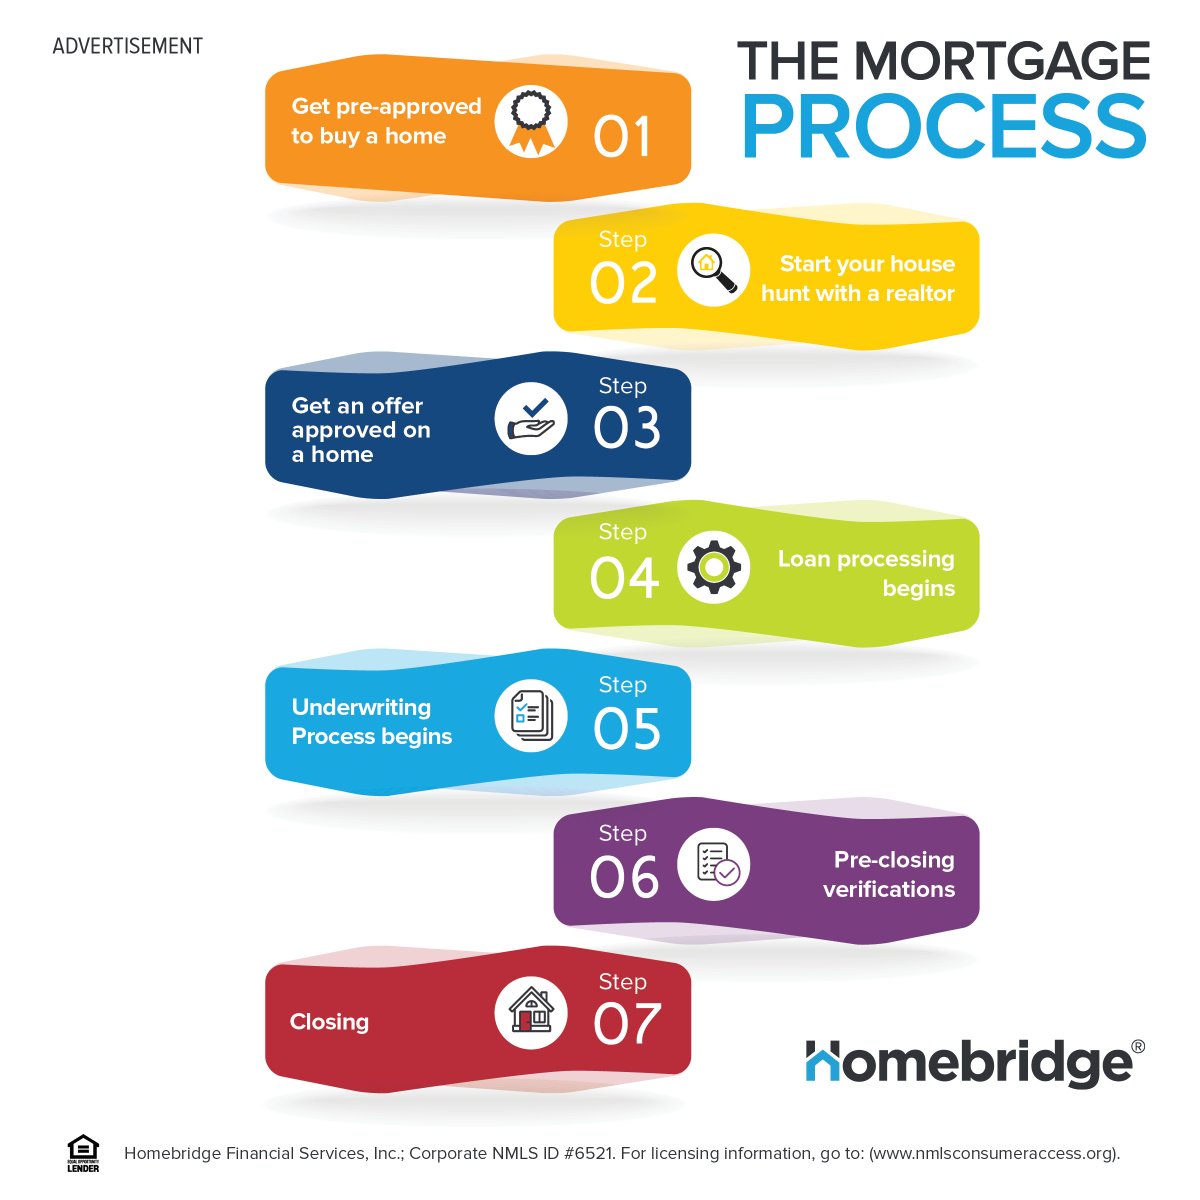 Let's talk about the #MortgageProcess timeline. While I always strive to move at the pace my clients are comfortable with, there is an order of operations that must happen along the way. Ready to get started with a #Preapproval? Let's chat!